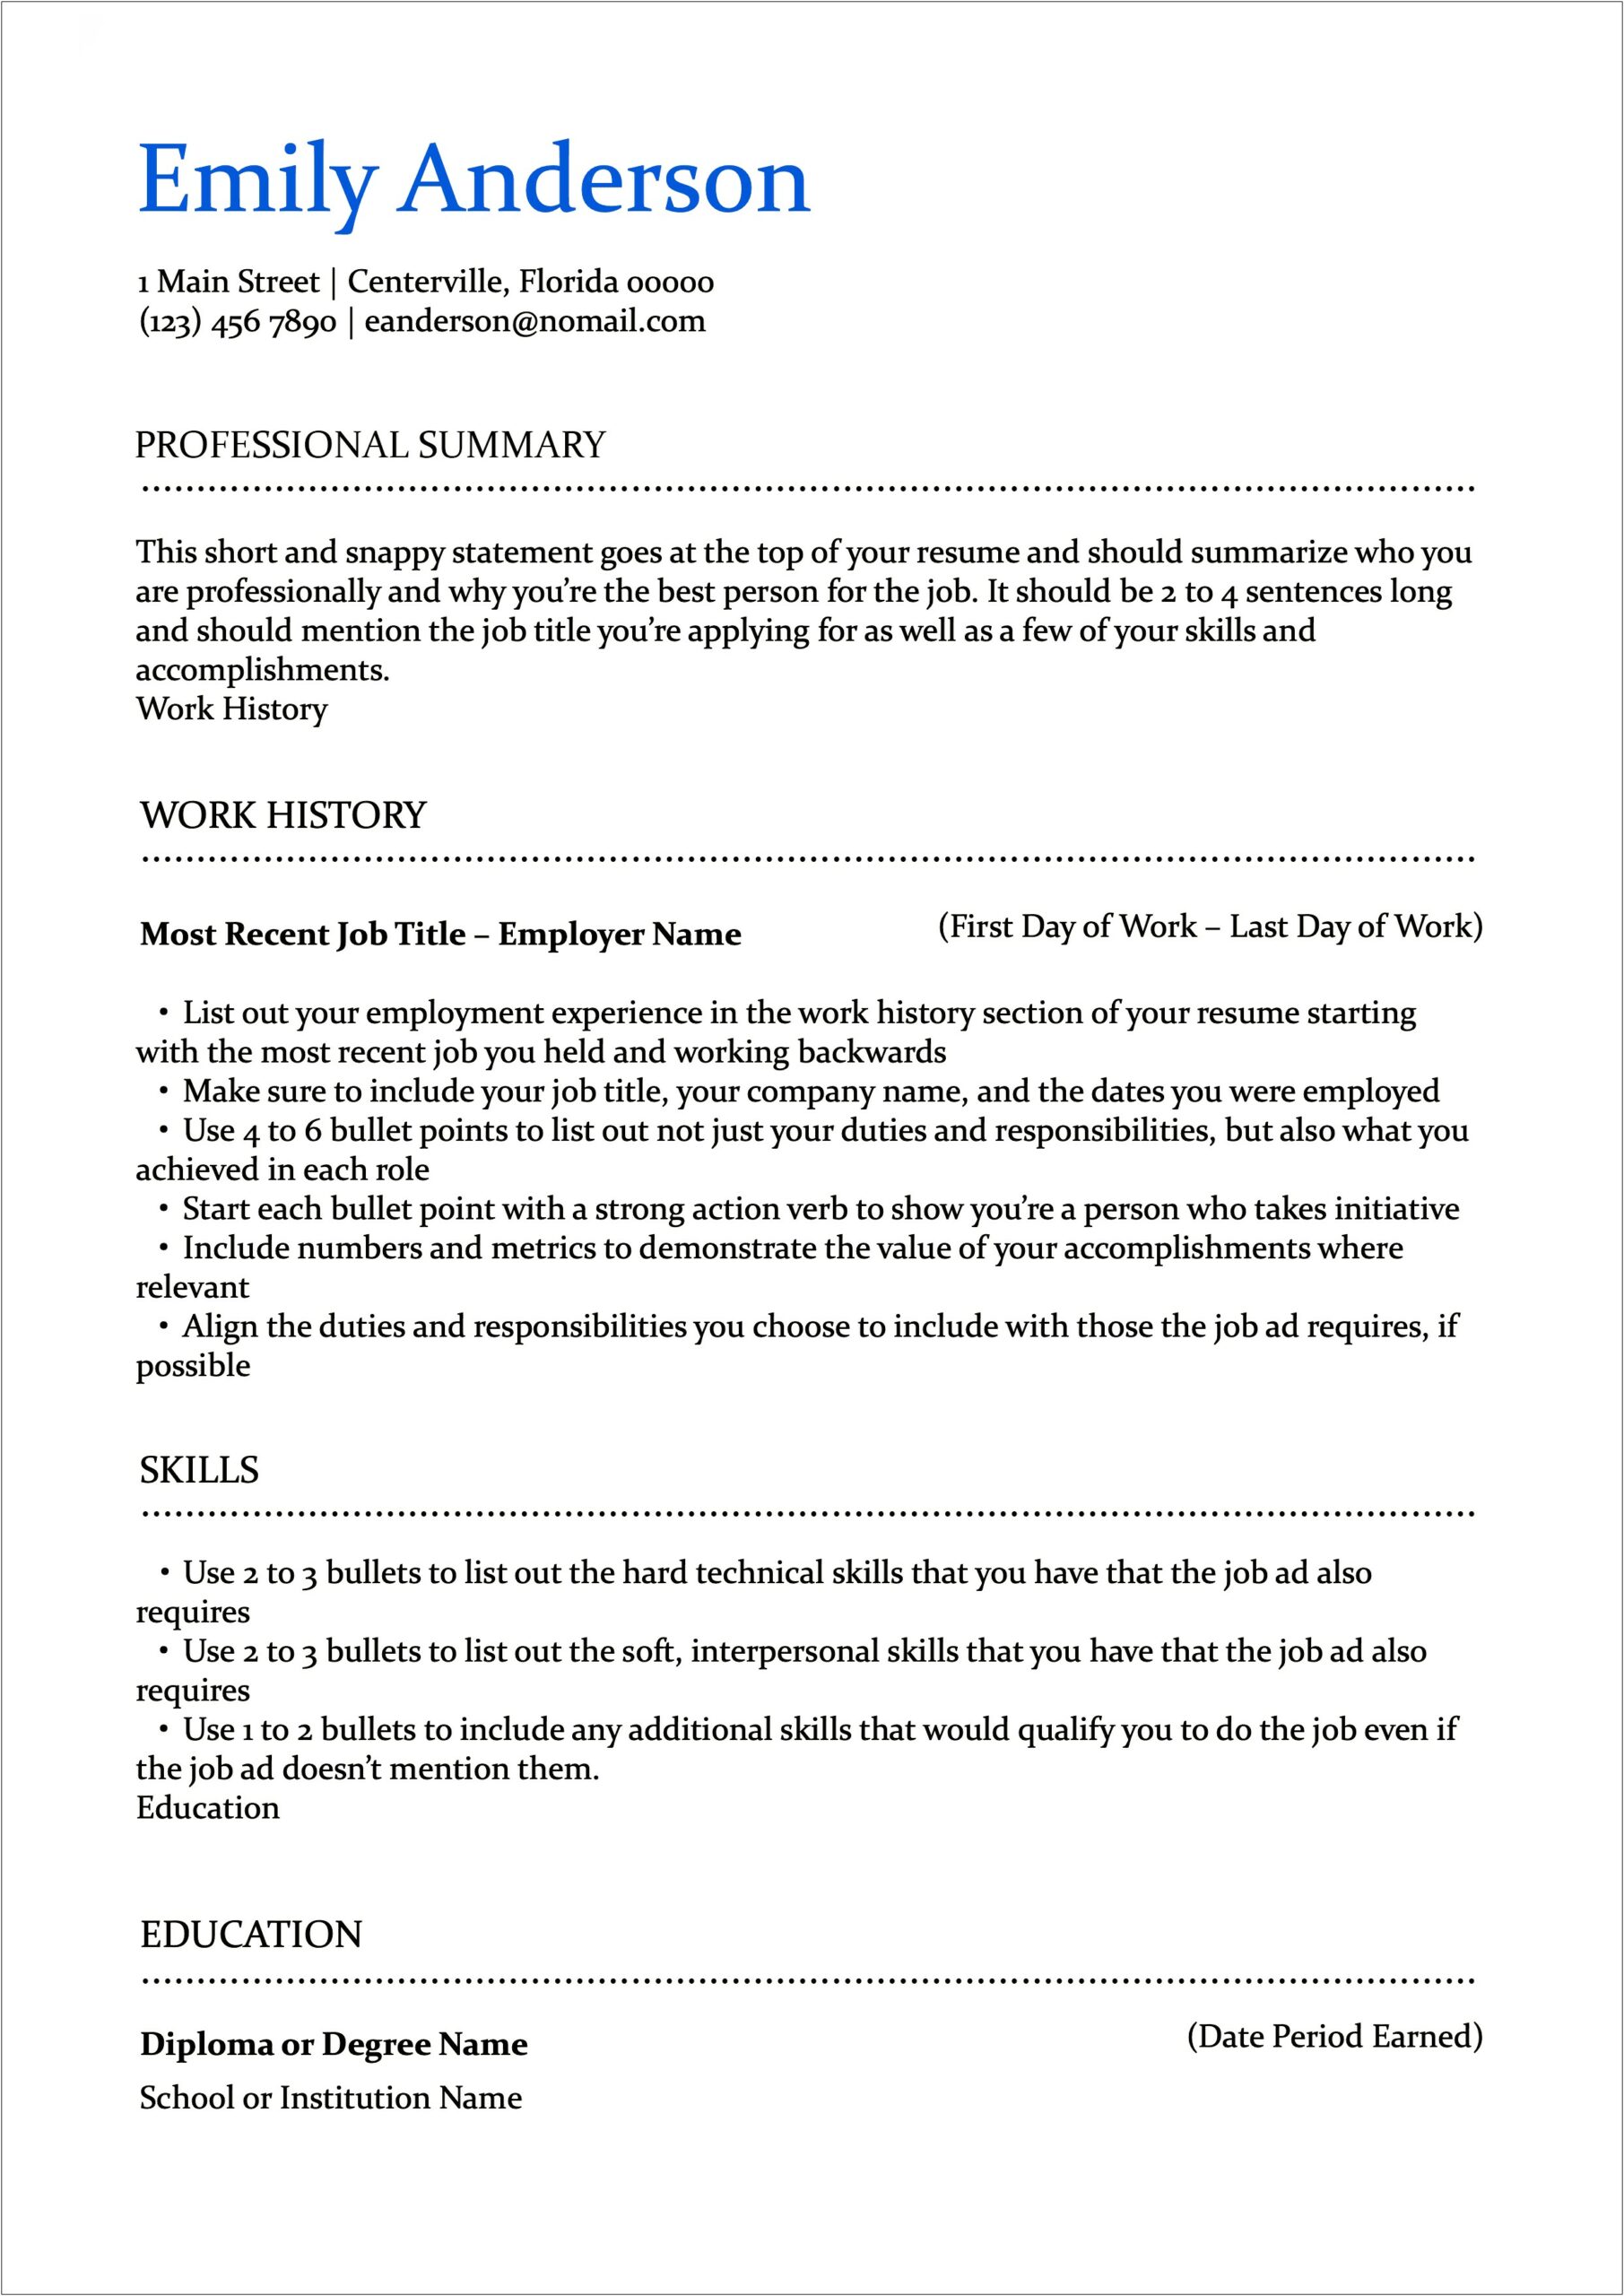 Resume Objective For Real Estate Assistant